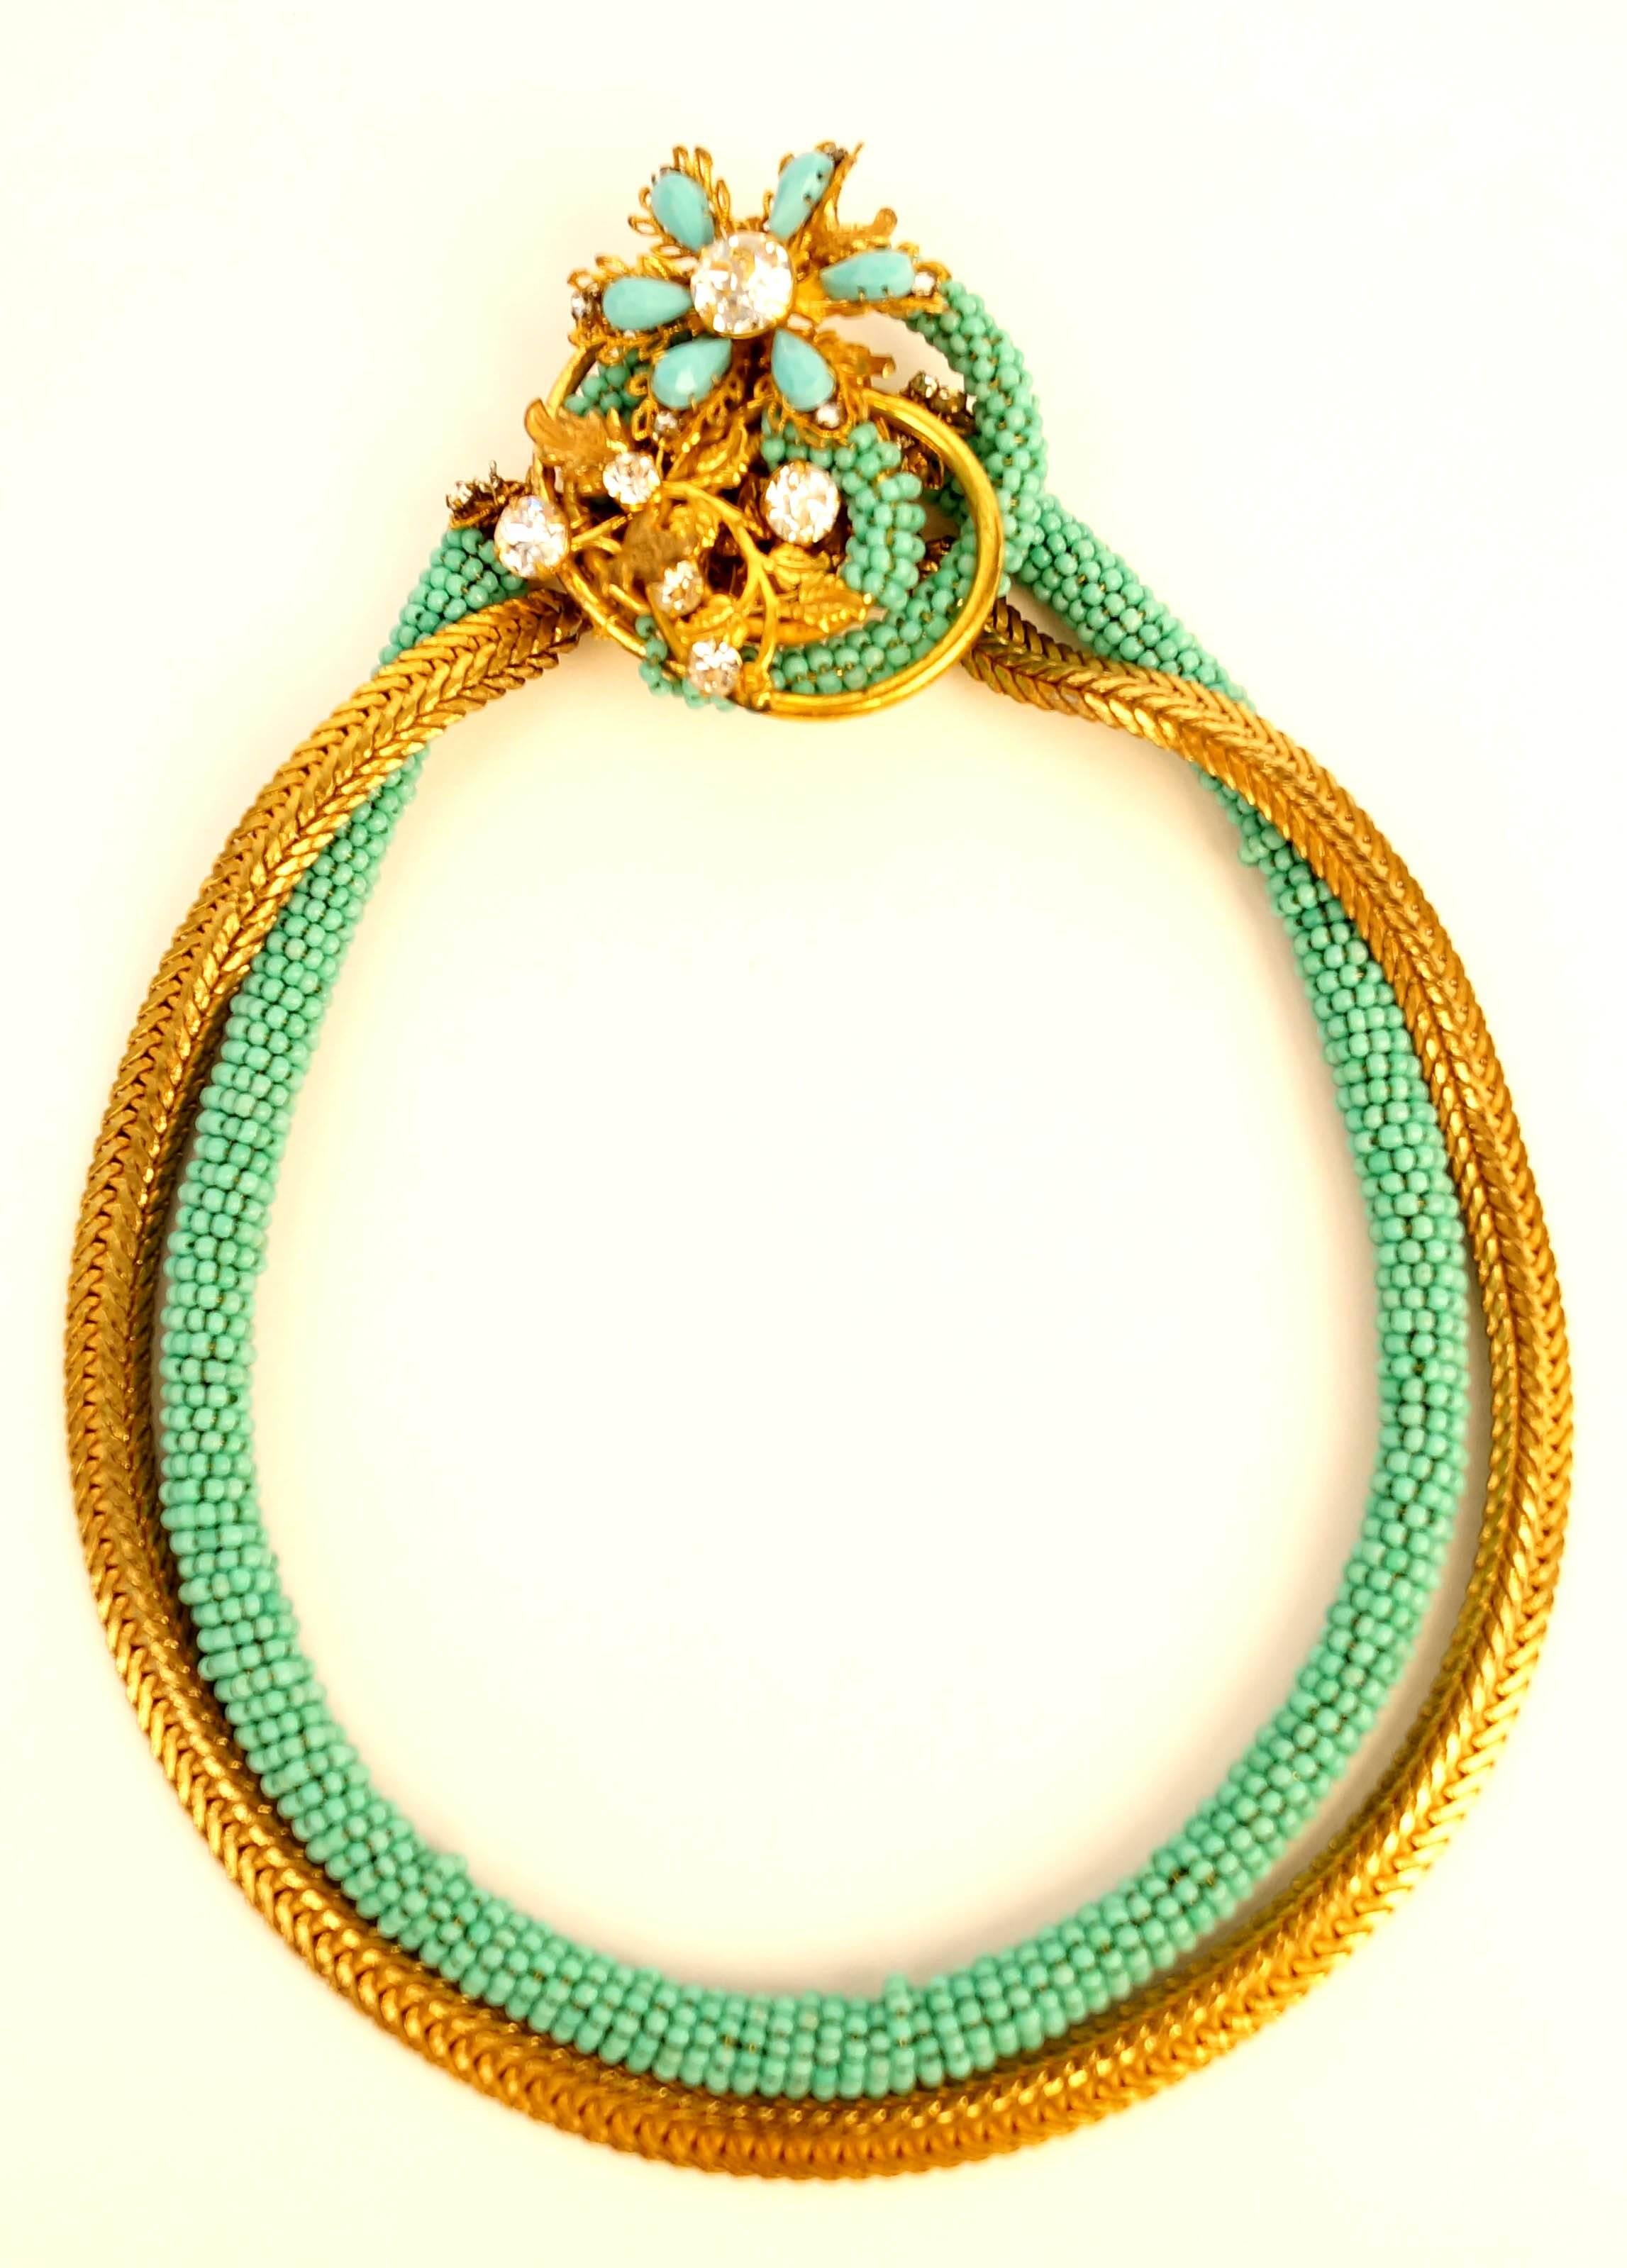 Spring has Sprung!!!!

This grand parure consists of a necklace, bracelet, brooch, and pair of earrings in glorious faux turquoise and gold. The necklace consists of a chain of of wrapped beads and a chain of circular gold-tone herringbone that wrap